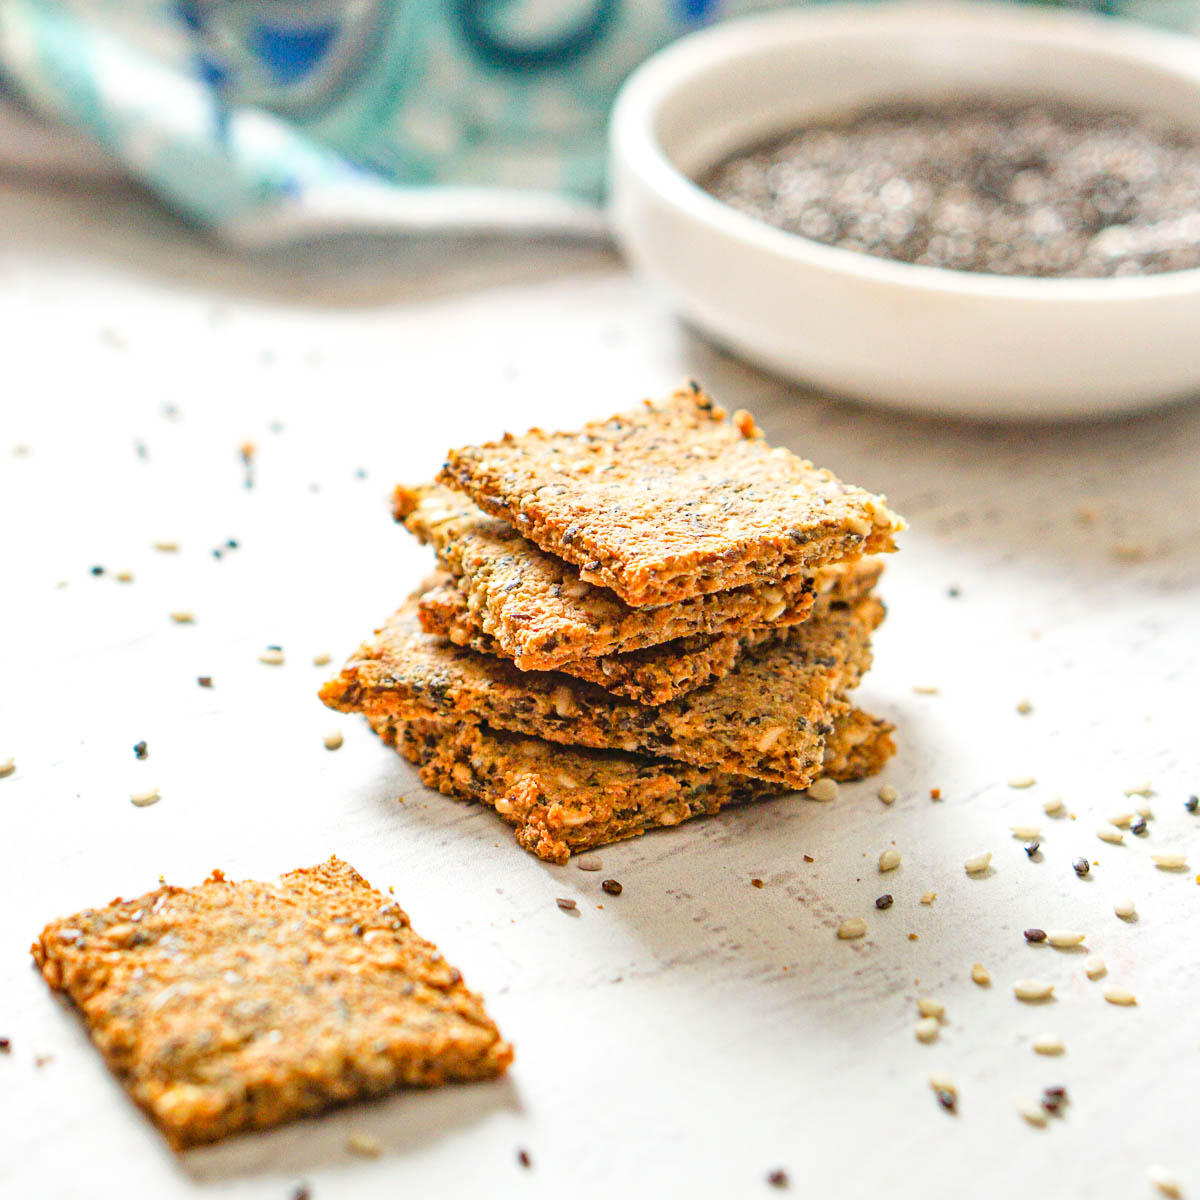 stack of keto crackers with scattered seeds